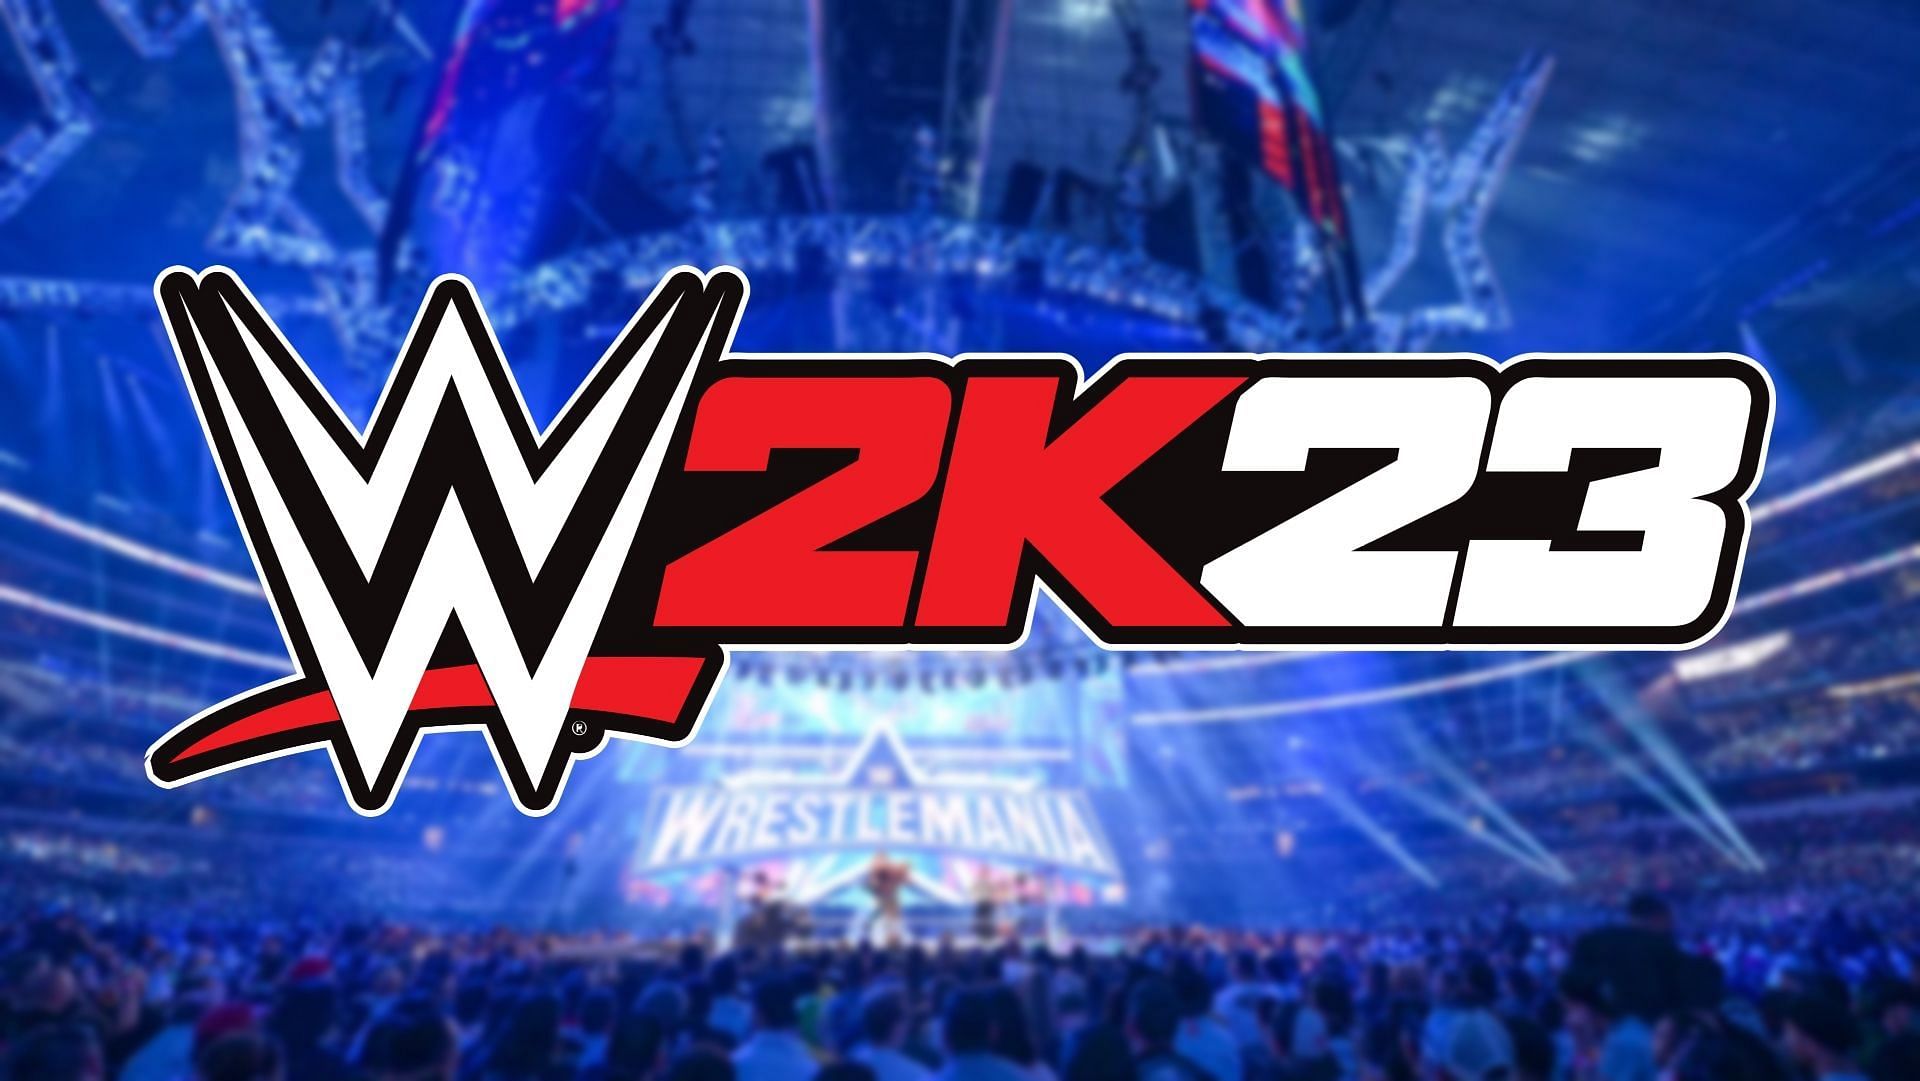 WWE 2K23 is set to be released on March 17th.